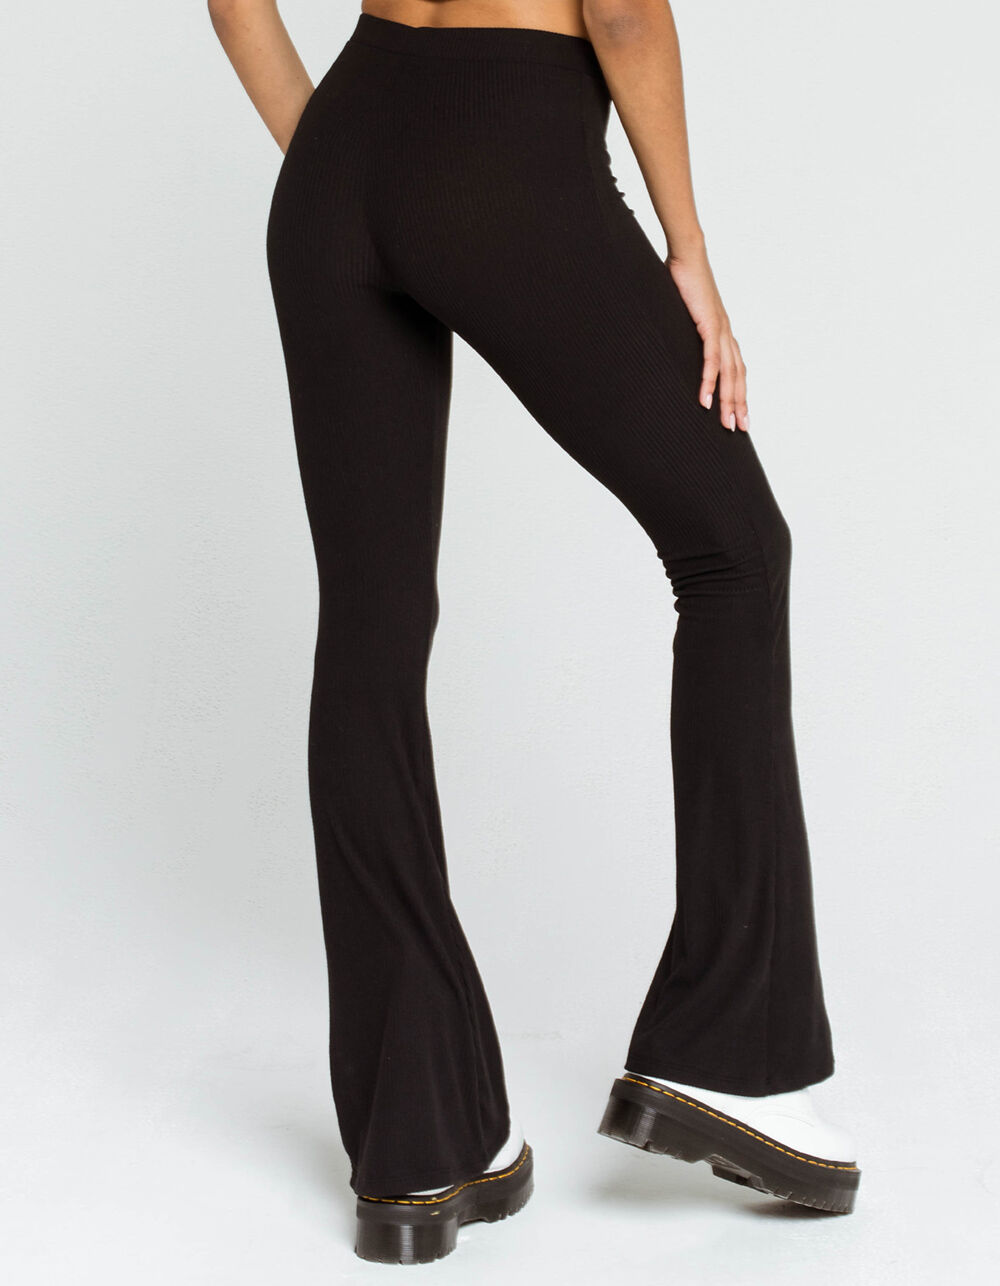 SKY AND SPARROW Rib Womens Flare Pants - BLACK | Tillys